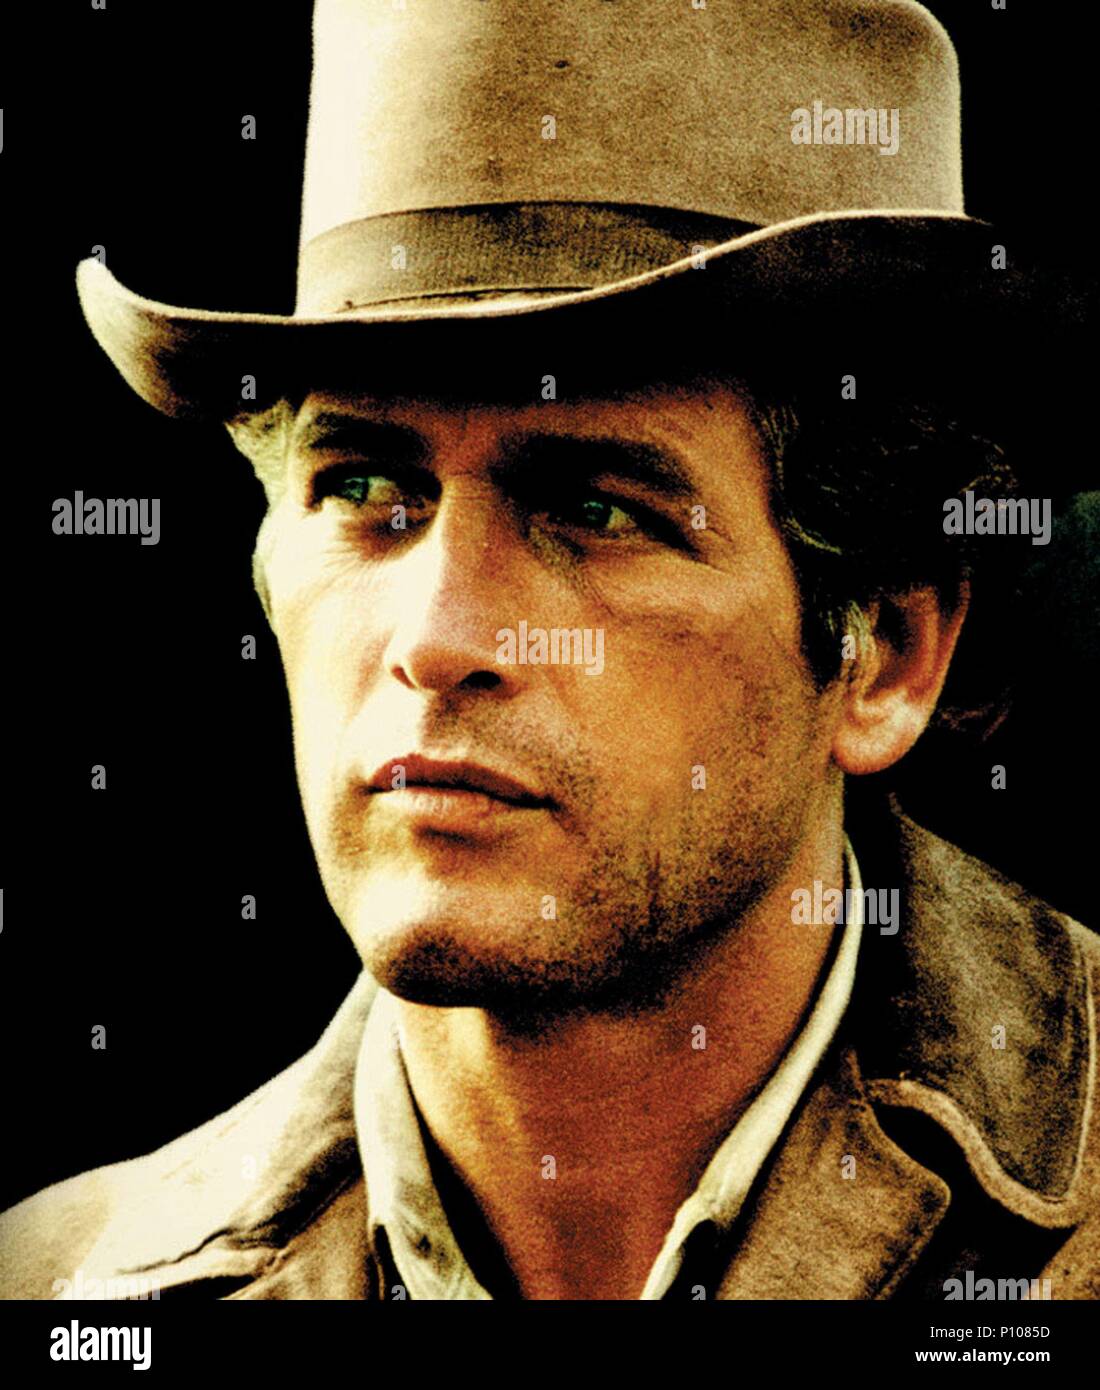 Original Film Title: BUTCH CASSIDY AND THE SUNDANCE KID.  English Title: BUTCH CASSIDY AND THE SUNDANCE KID.  Film Director: GEORGE ROY HILL.  Year: 1969.  Stars: PAUL NEWMAN. Credit: 20TH CENTURY FOX / Album Stock Photo